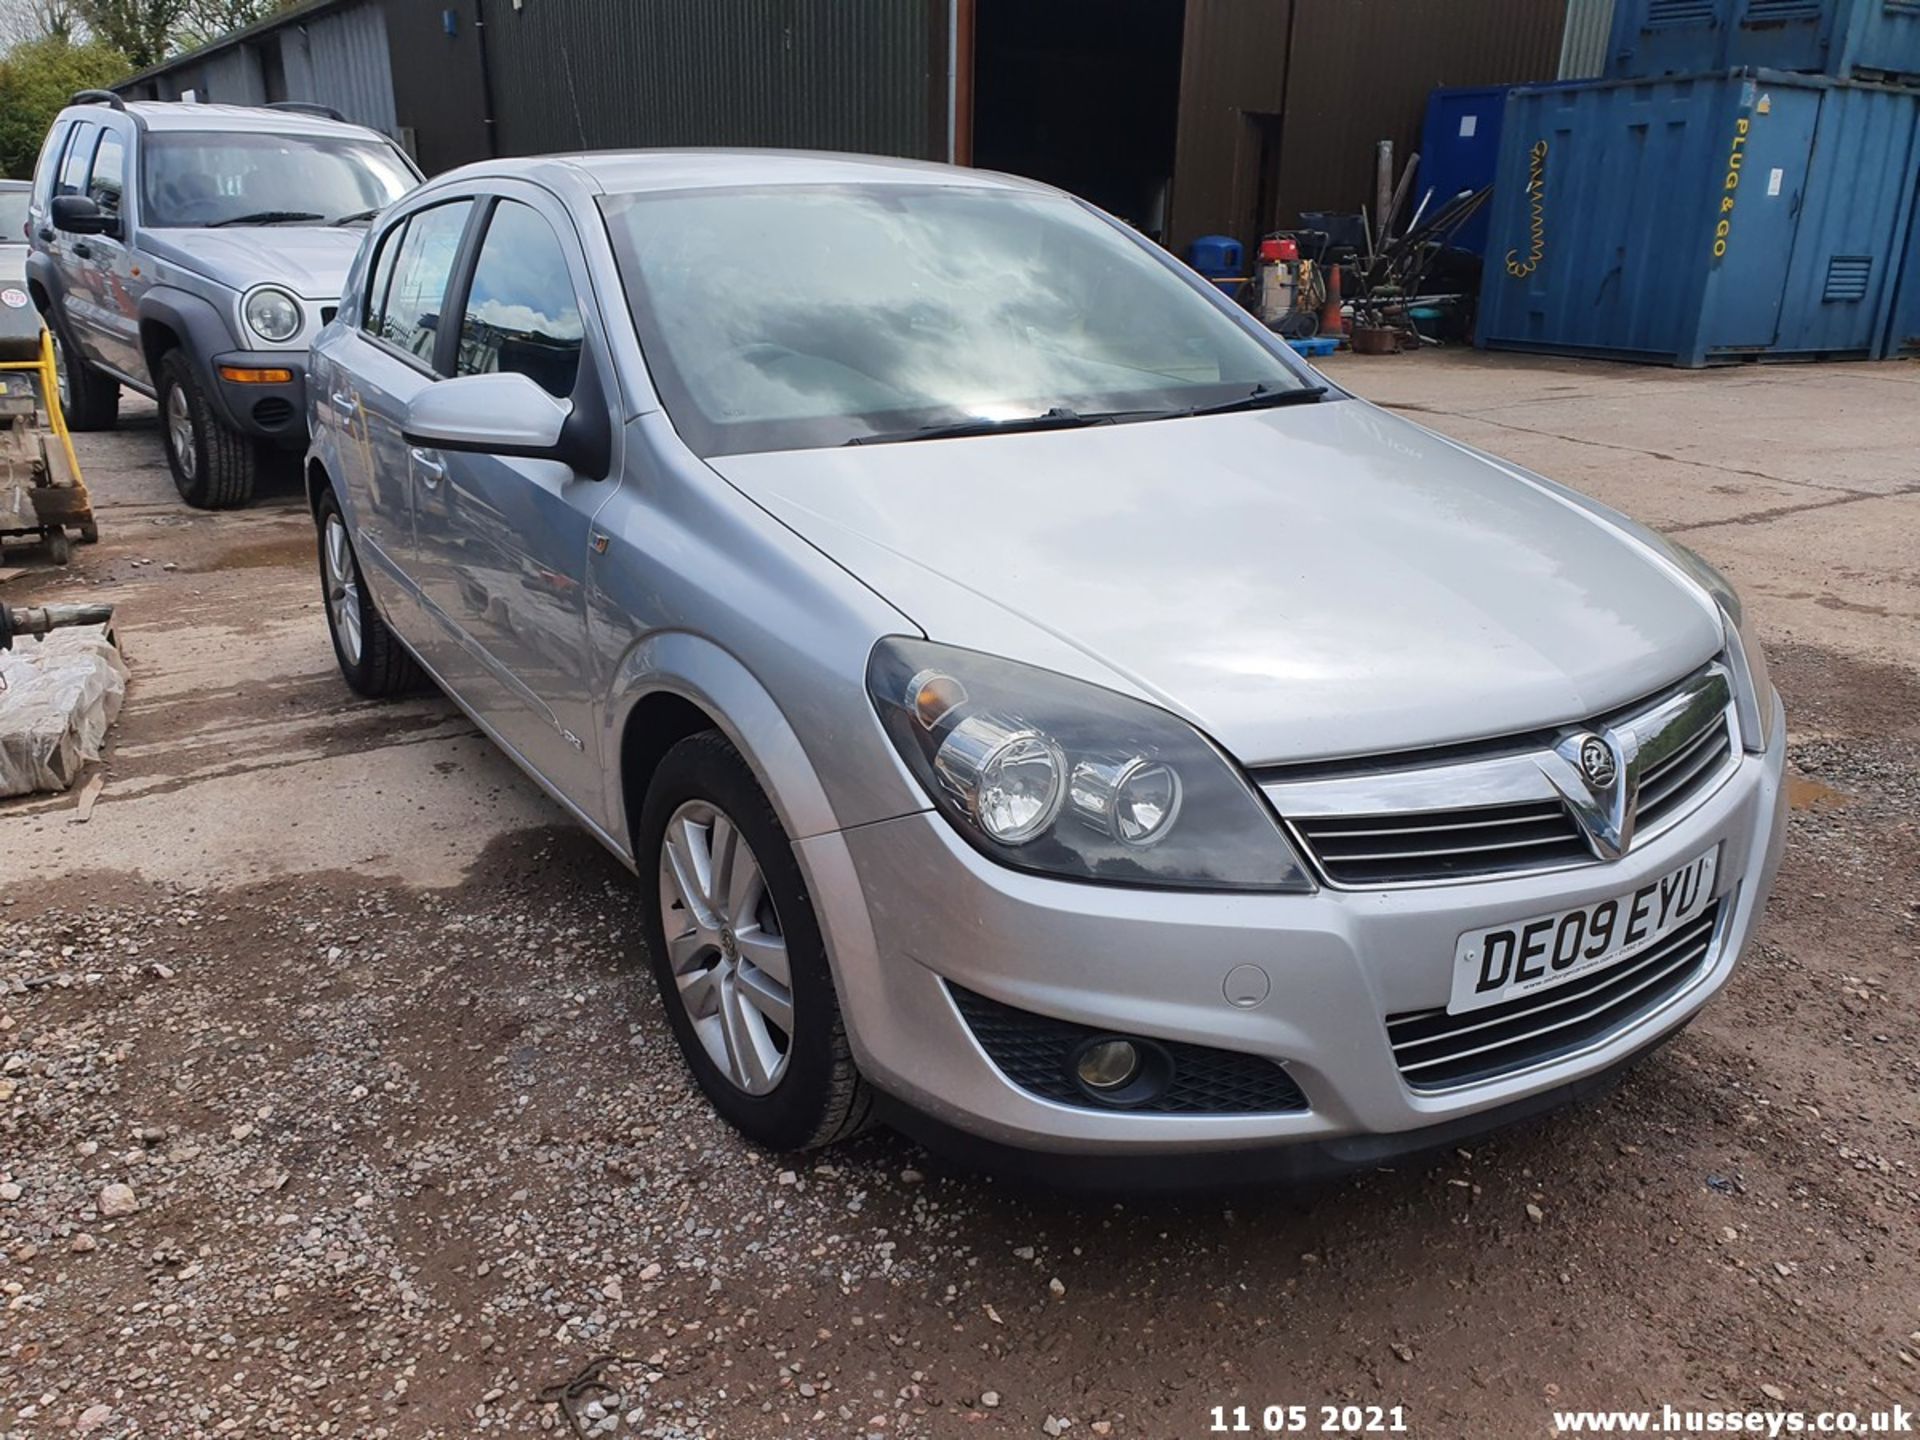 09/09 VAUXHALL ASTRA SXI TWINPORT - 1364cc 5dr Hatchback (Silver, 101k) - Image 8 of 13